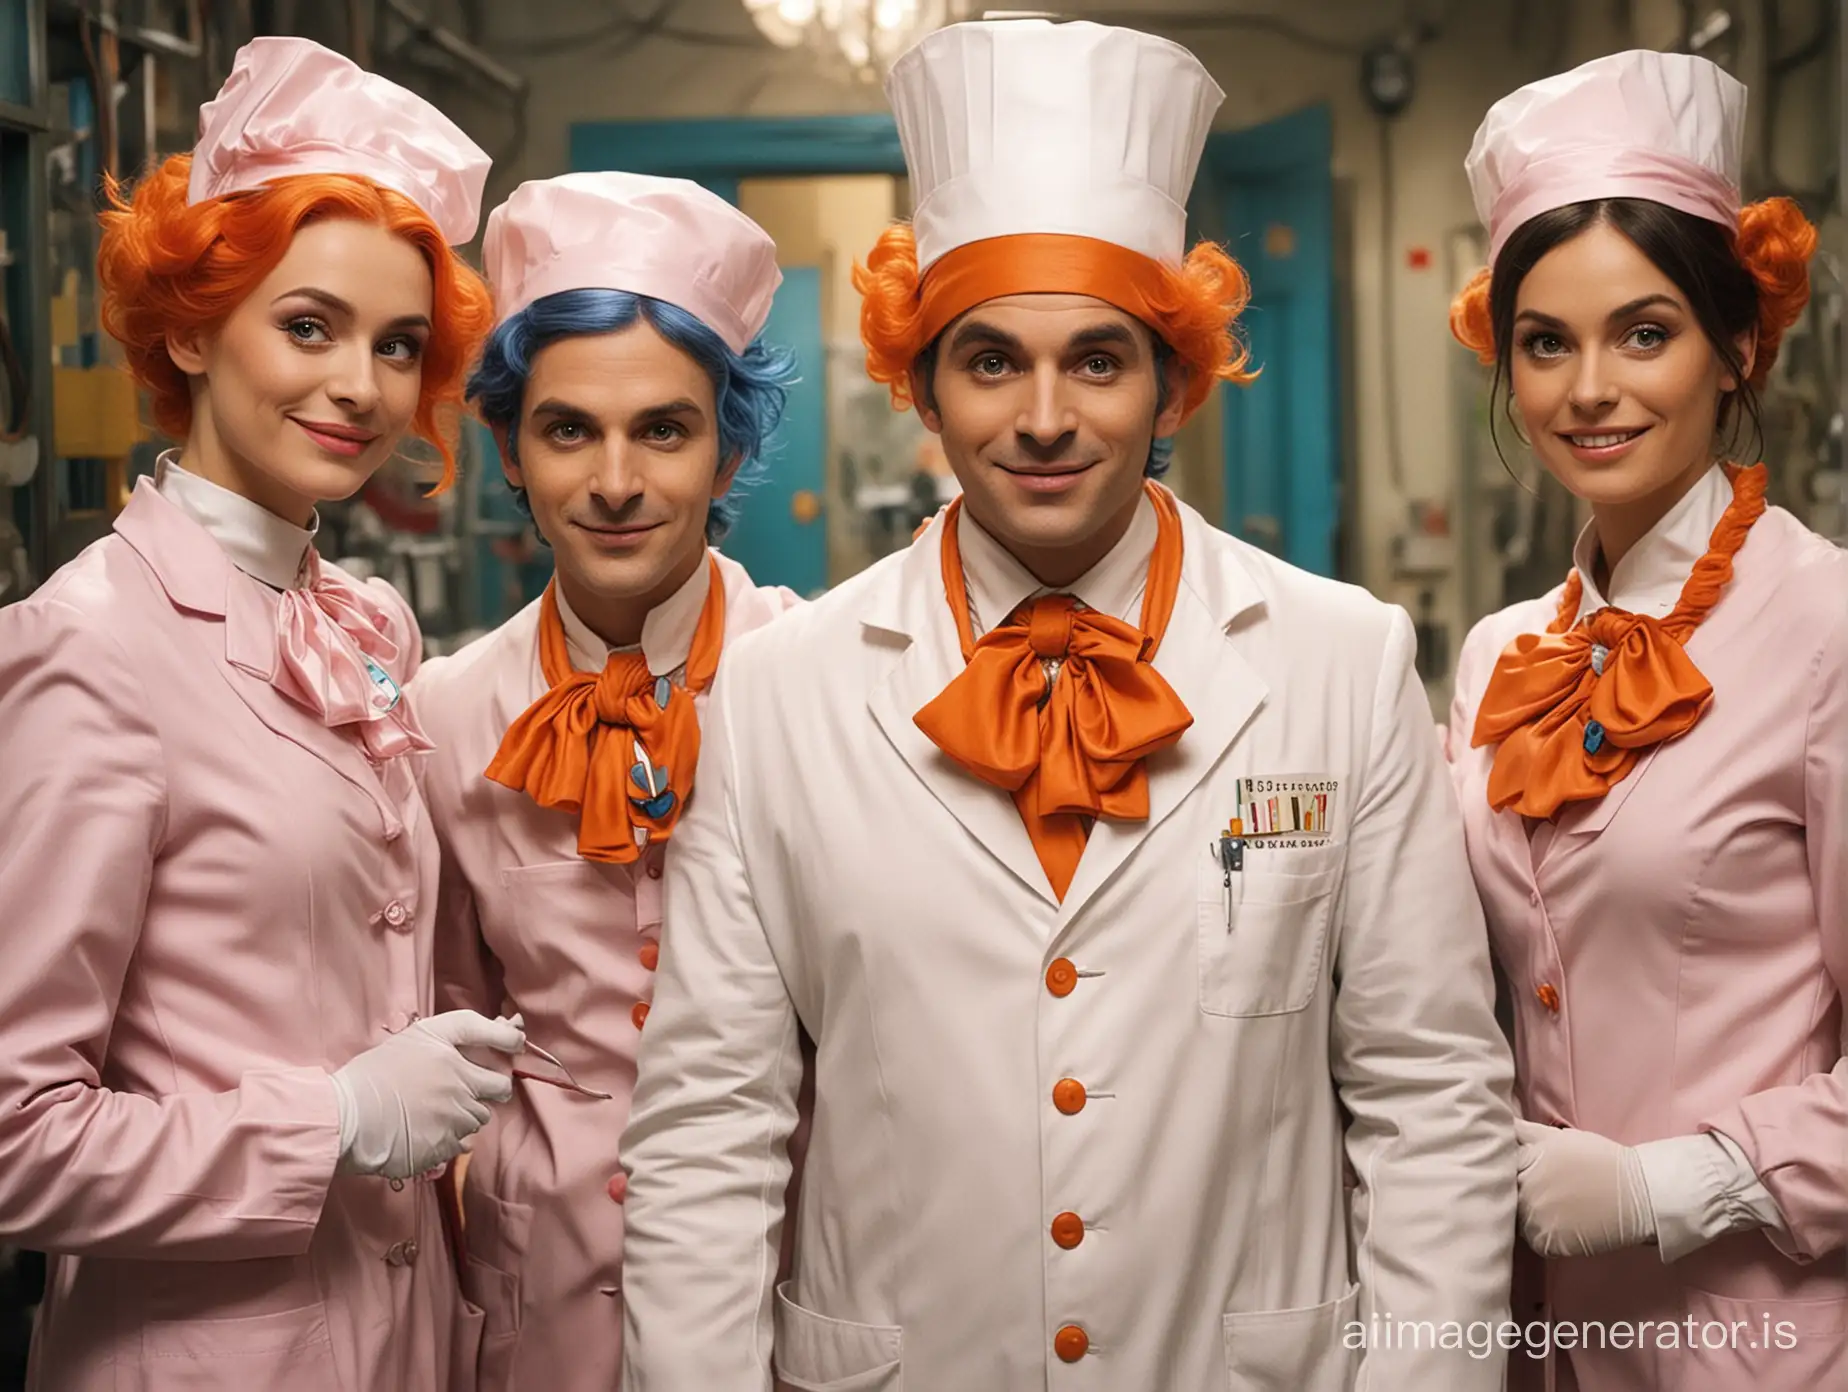 a flamboyant doctor with small oompa loompas as nurses. Weird and colorful fantasy world. Charlie and the chocolate factory like atmosphere. Extremely weird.